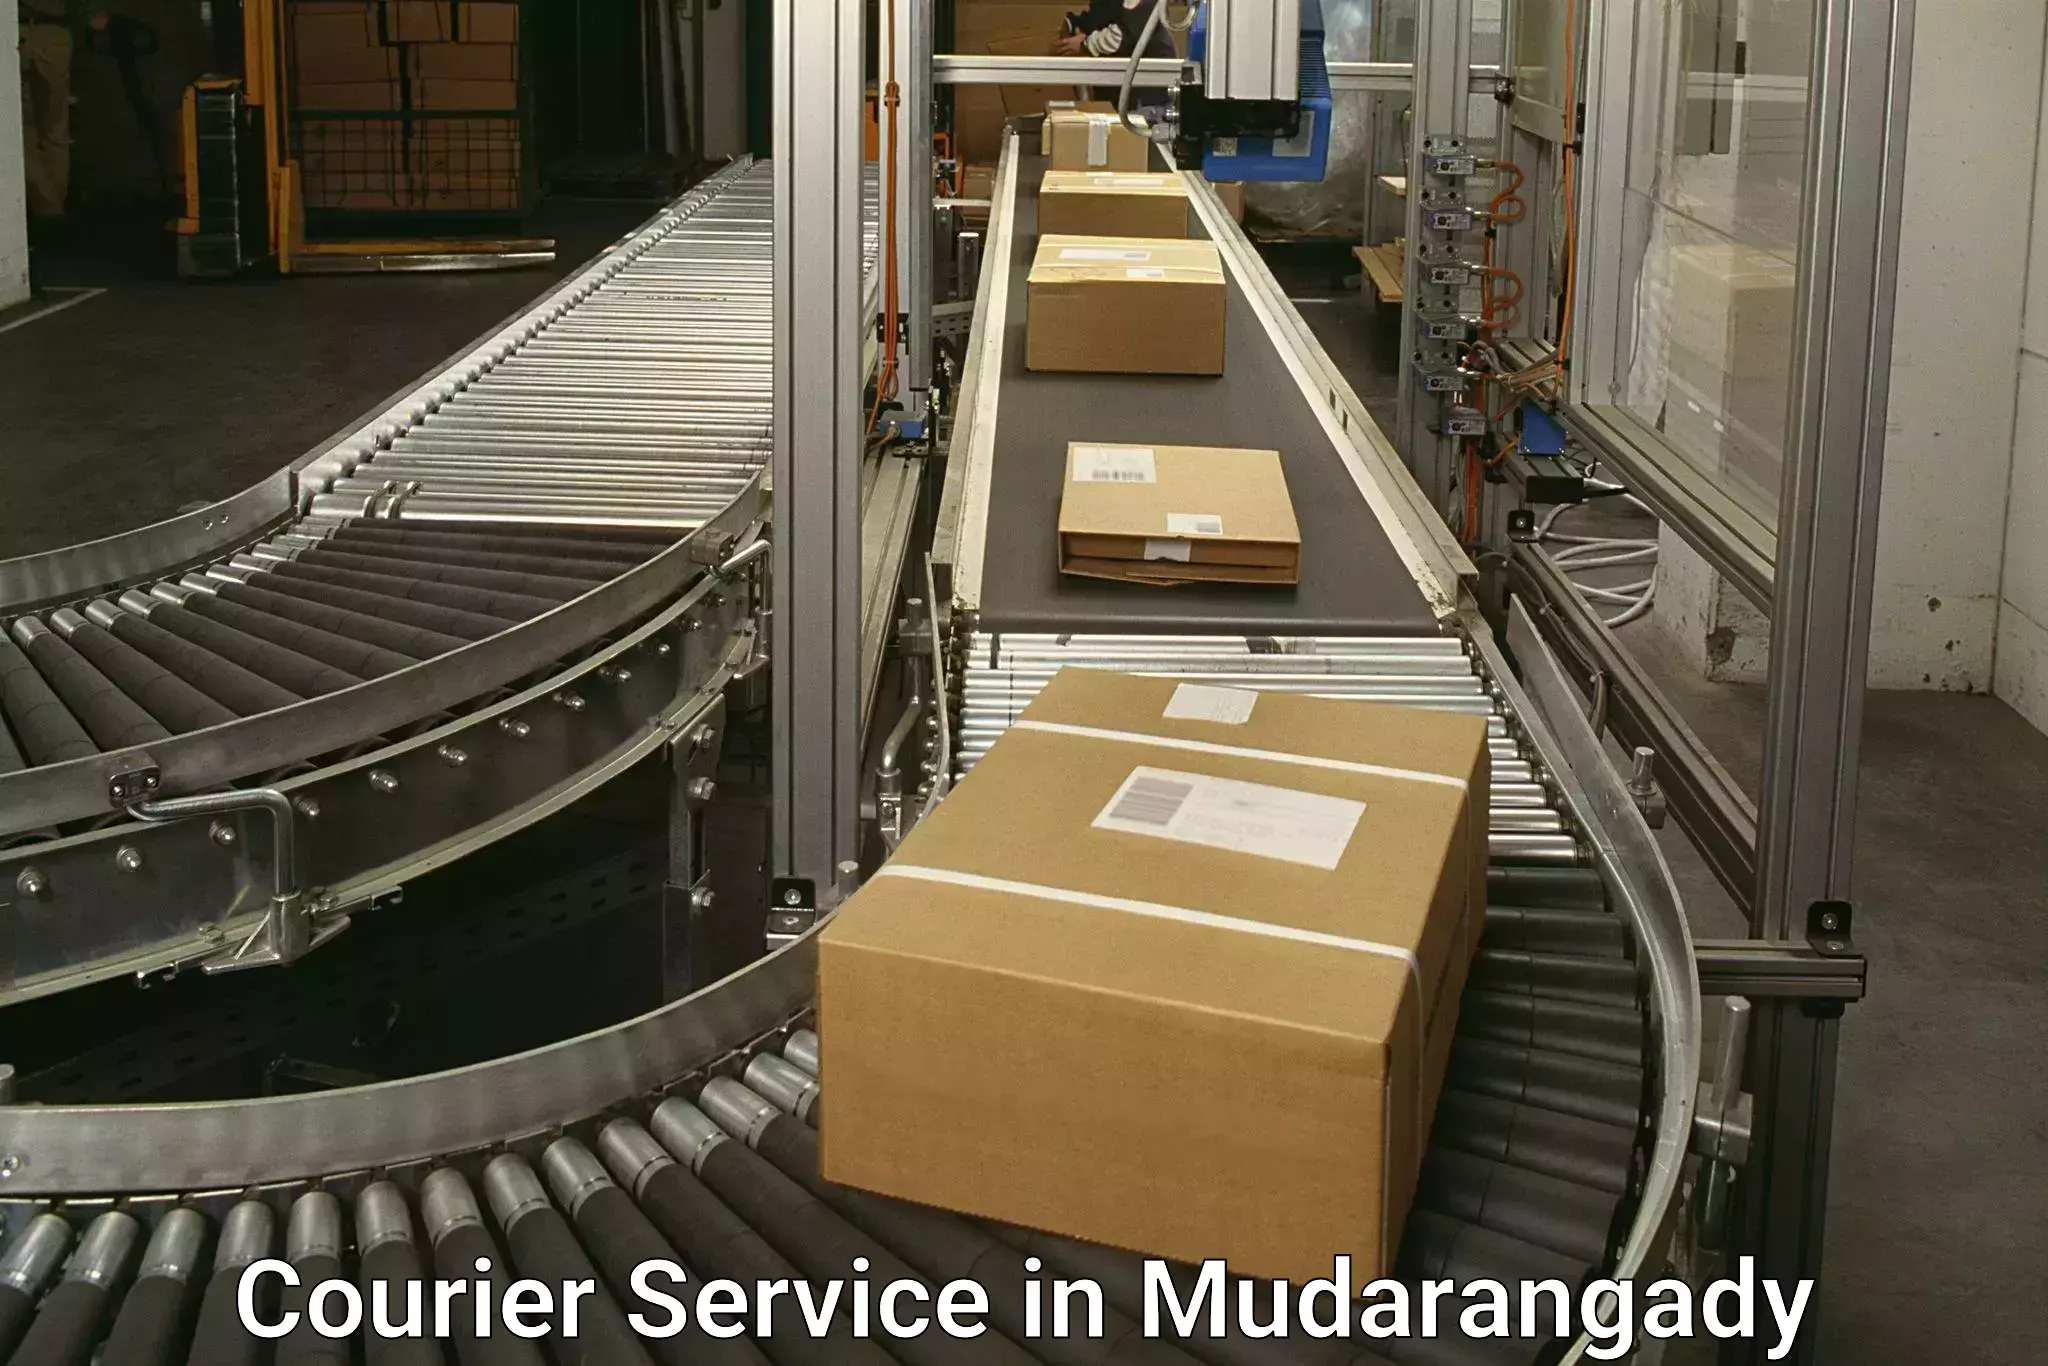 Personal courier services in Mudarangady